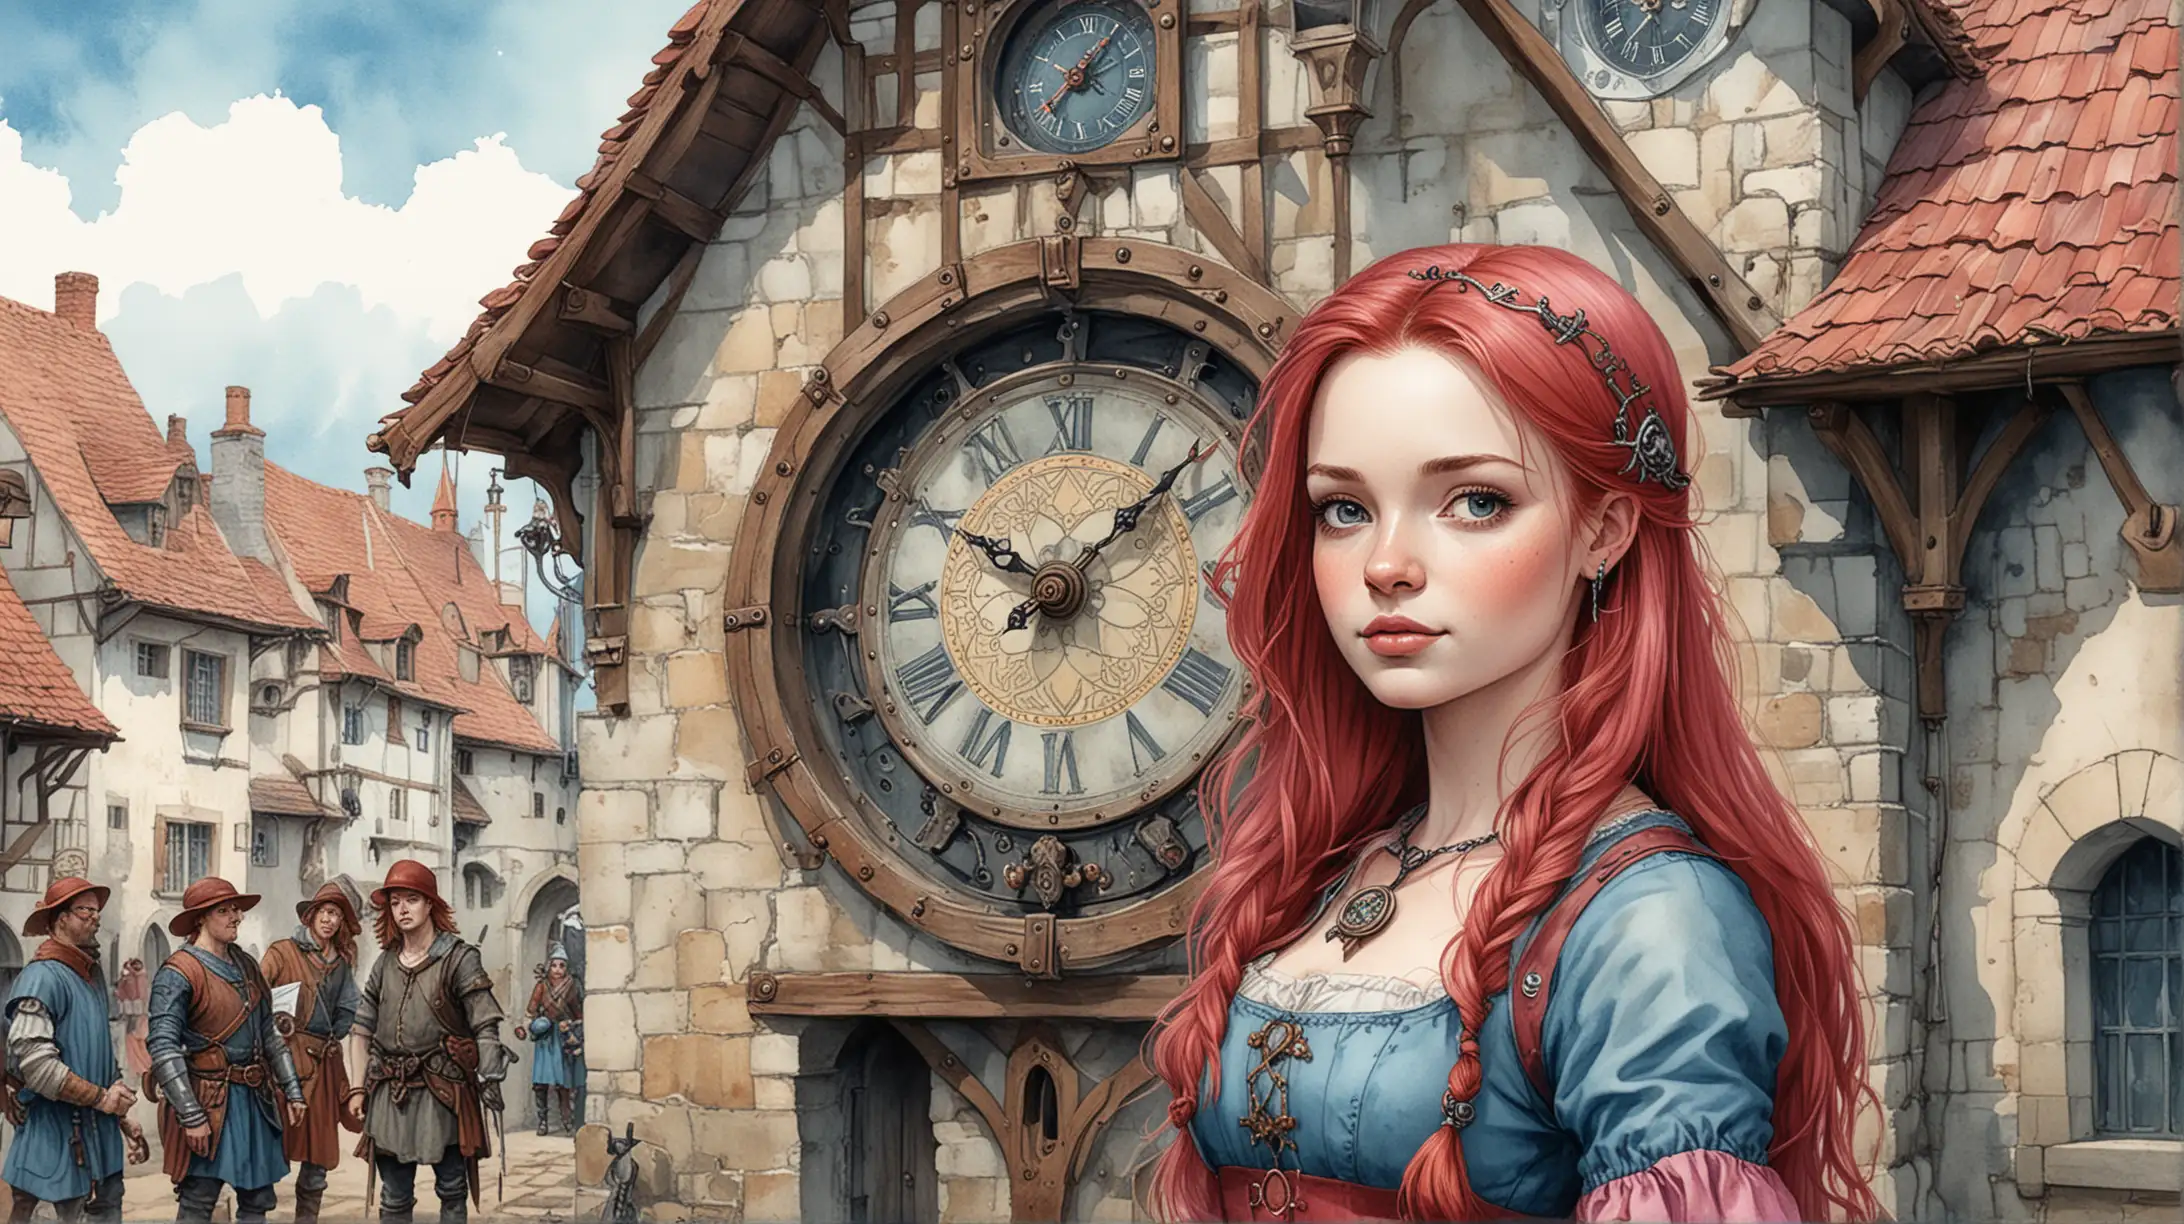 Medieval Steampunk Village with RedHaired Villagers and Clock Tower